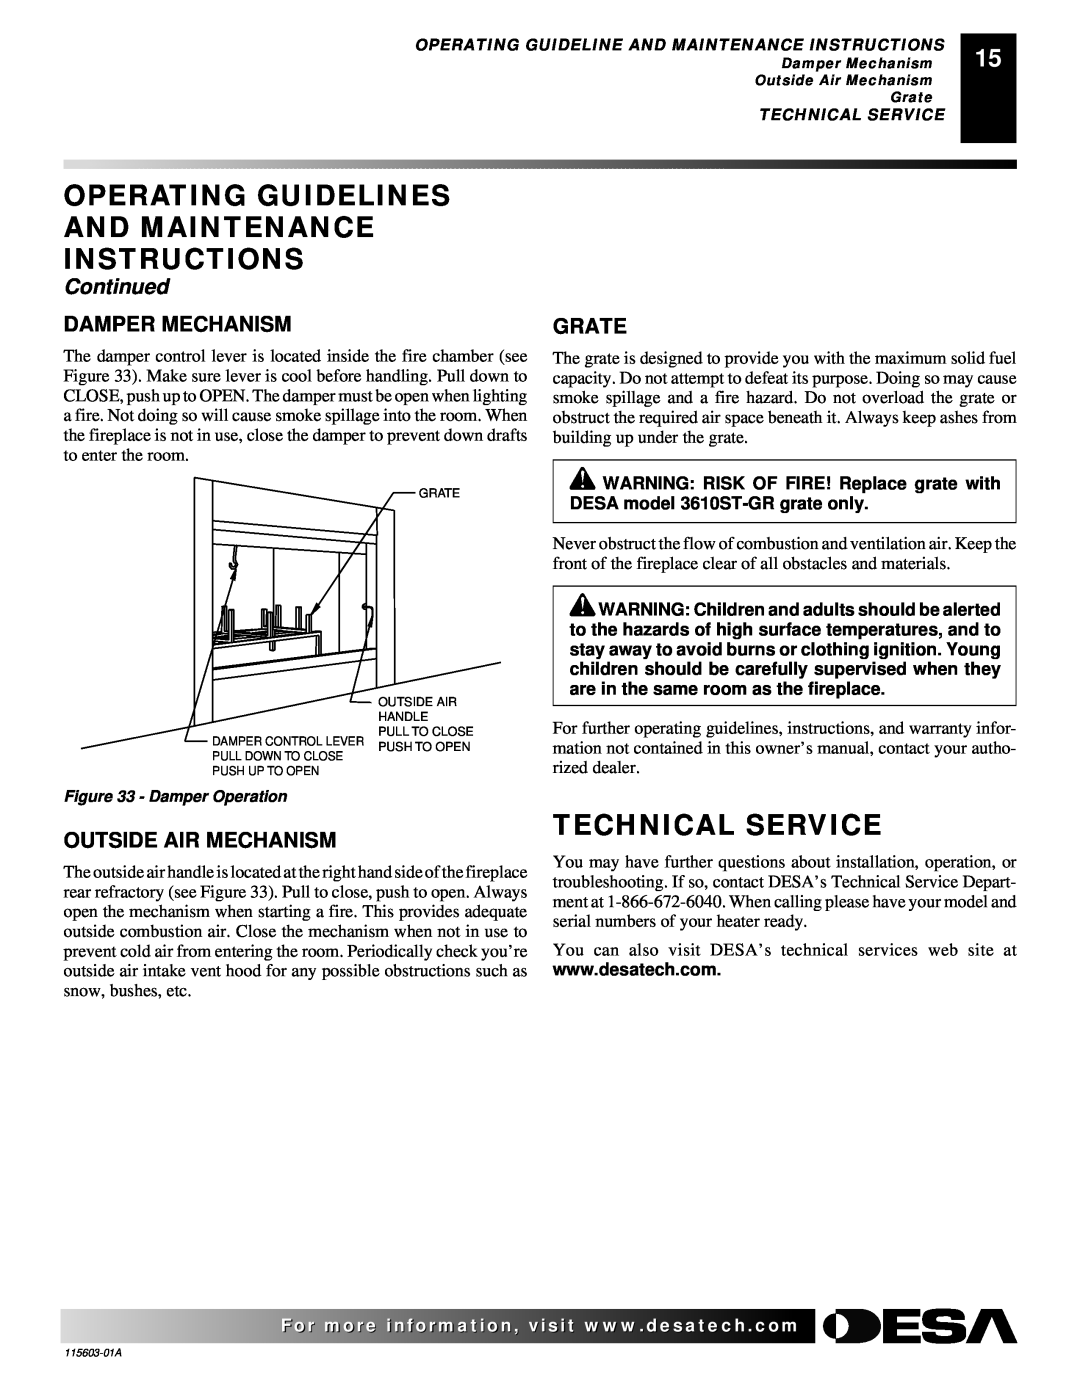 Desa (V)3612ST Technical Service, Operating Guidelines And Maintenance Instructions, Continued, Damper Mechanism, Grate 